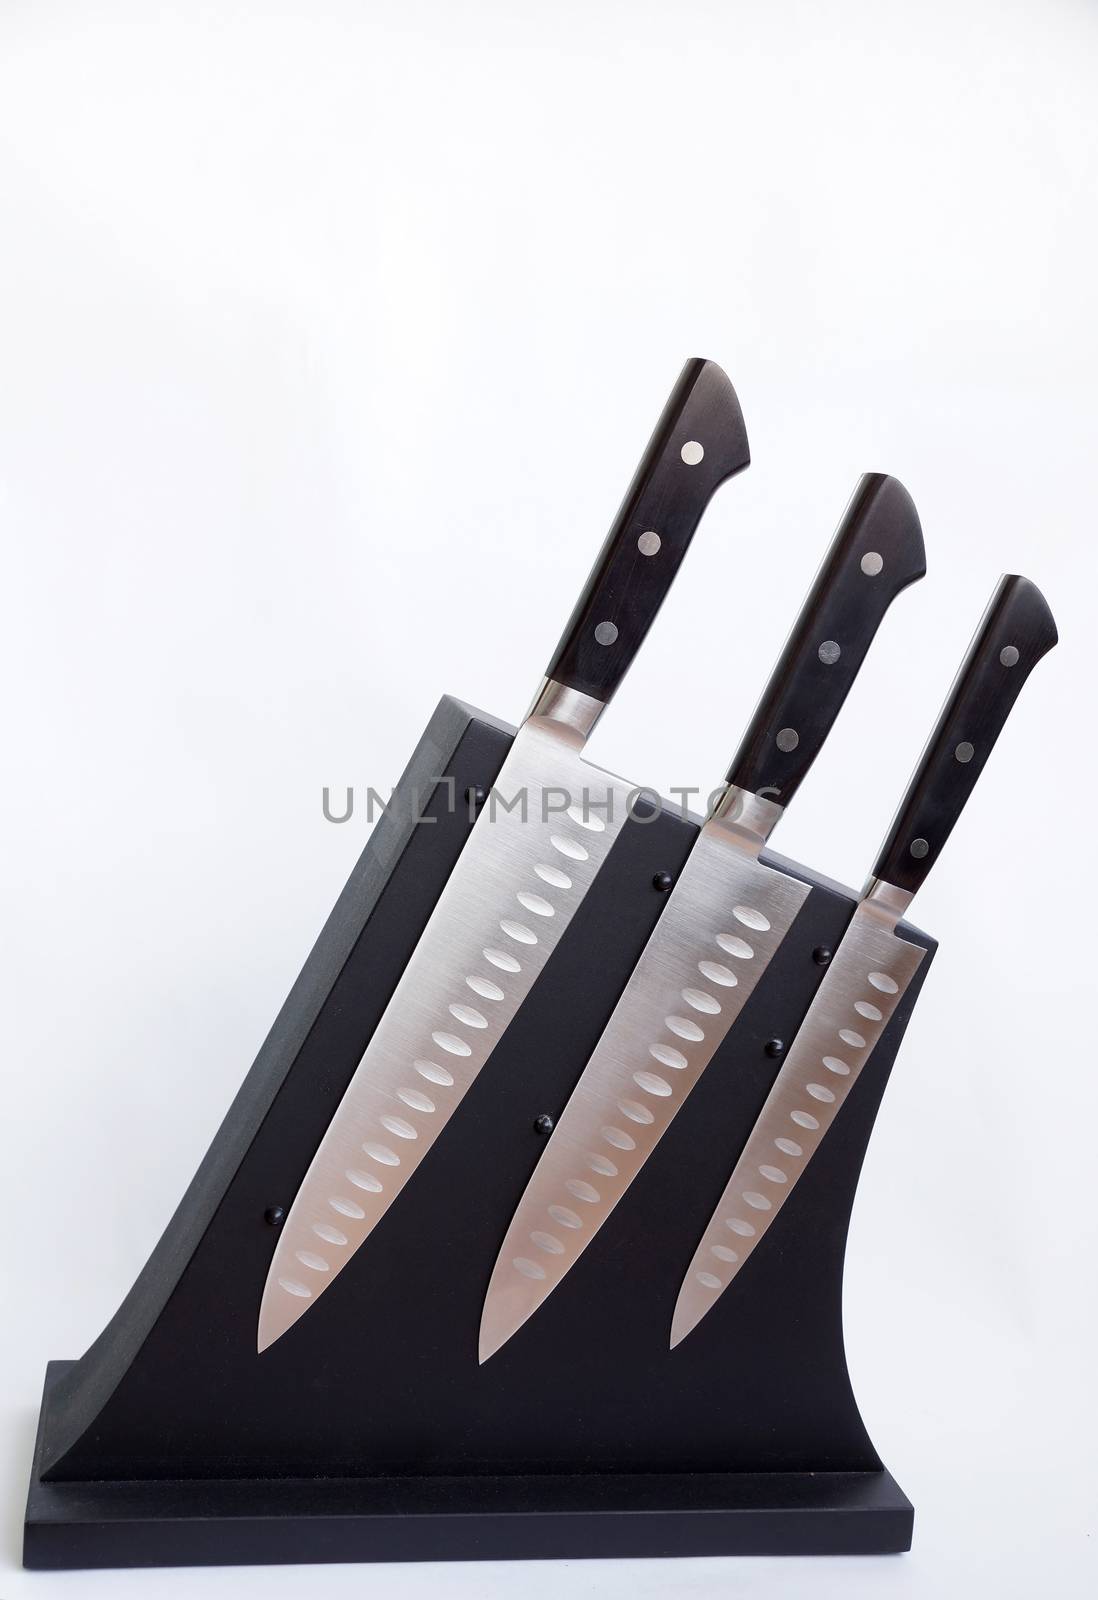 Set of knives for kitchen on a magnetic support